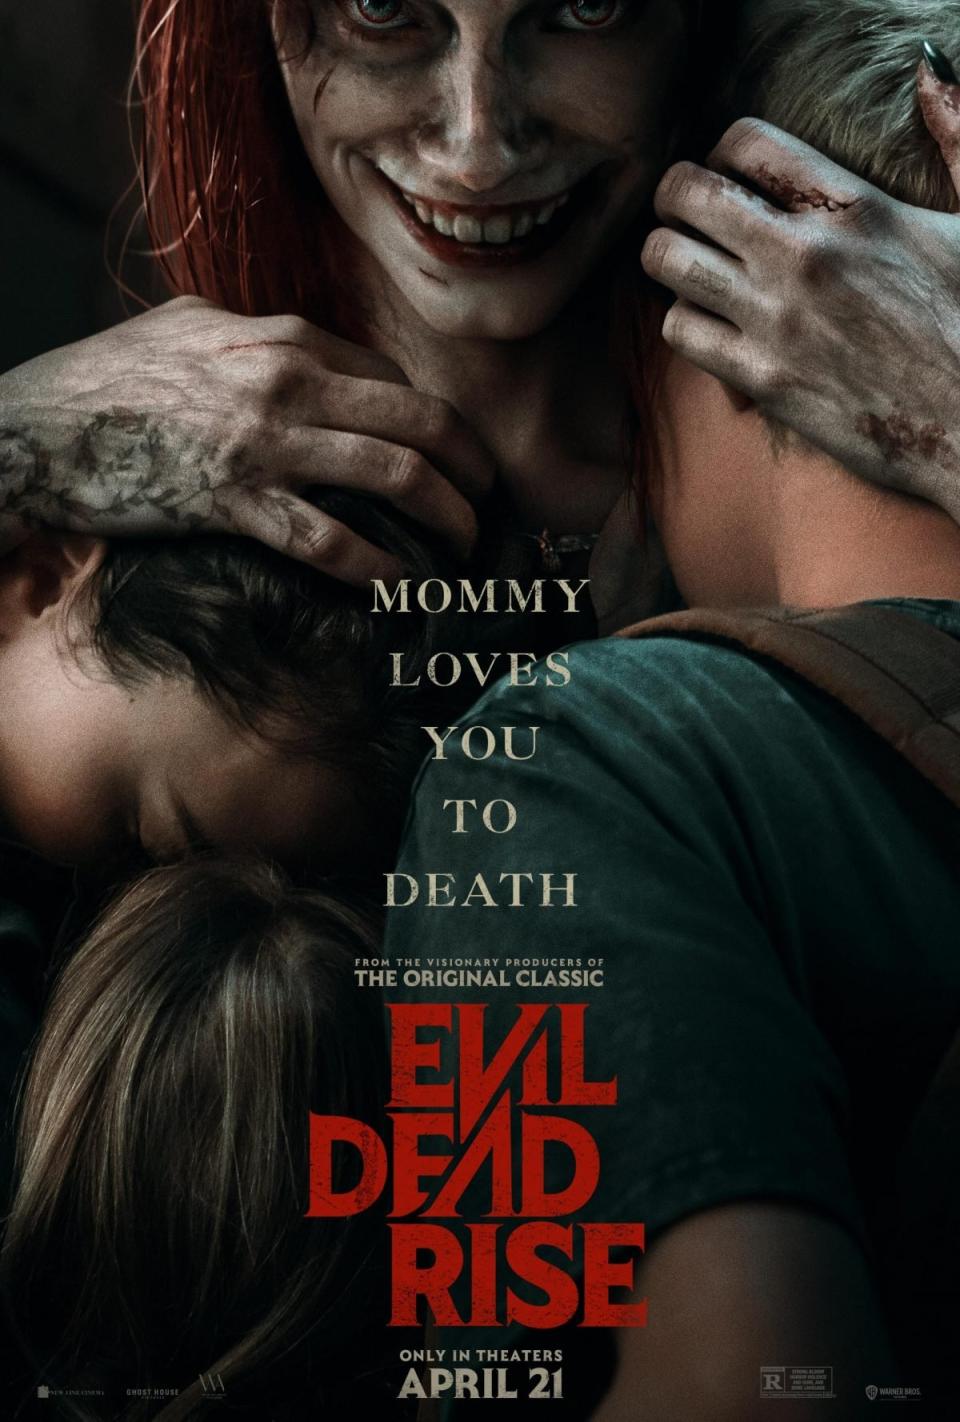 photo of zombie looking woman cradling three kids for evil dead rise trailer poster